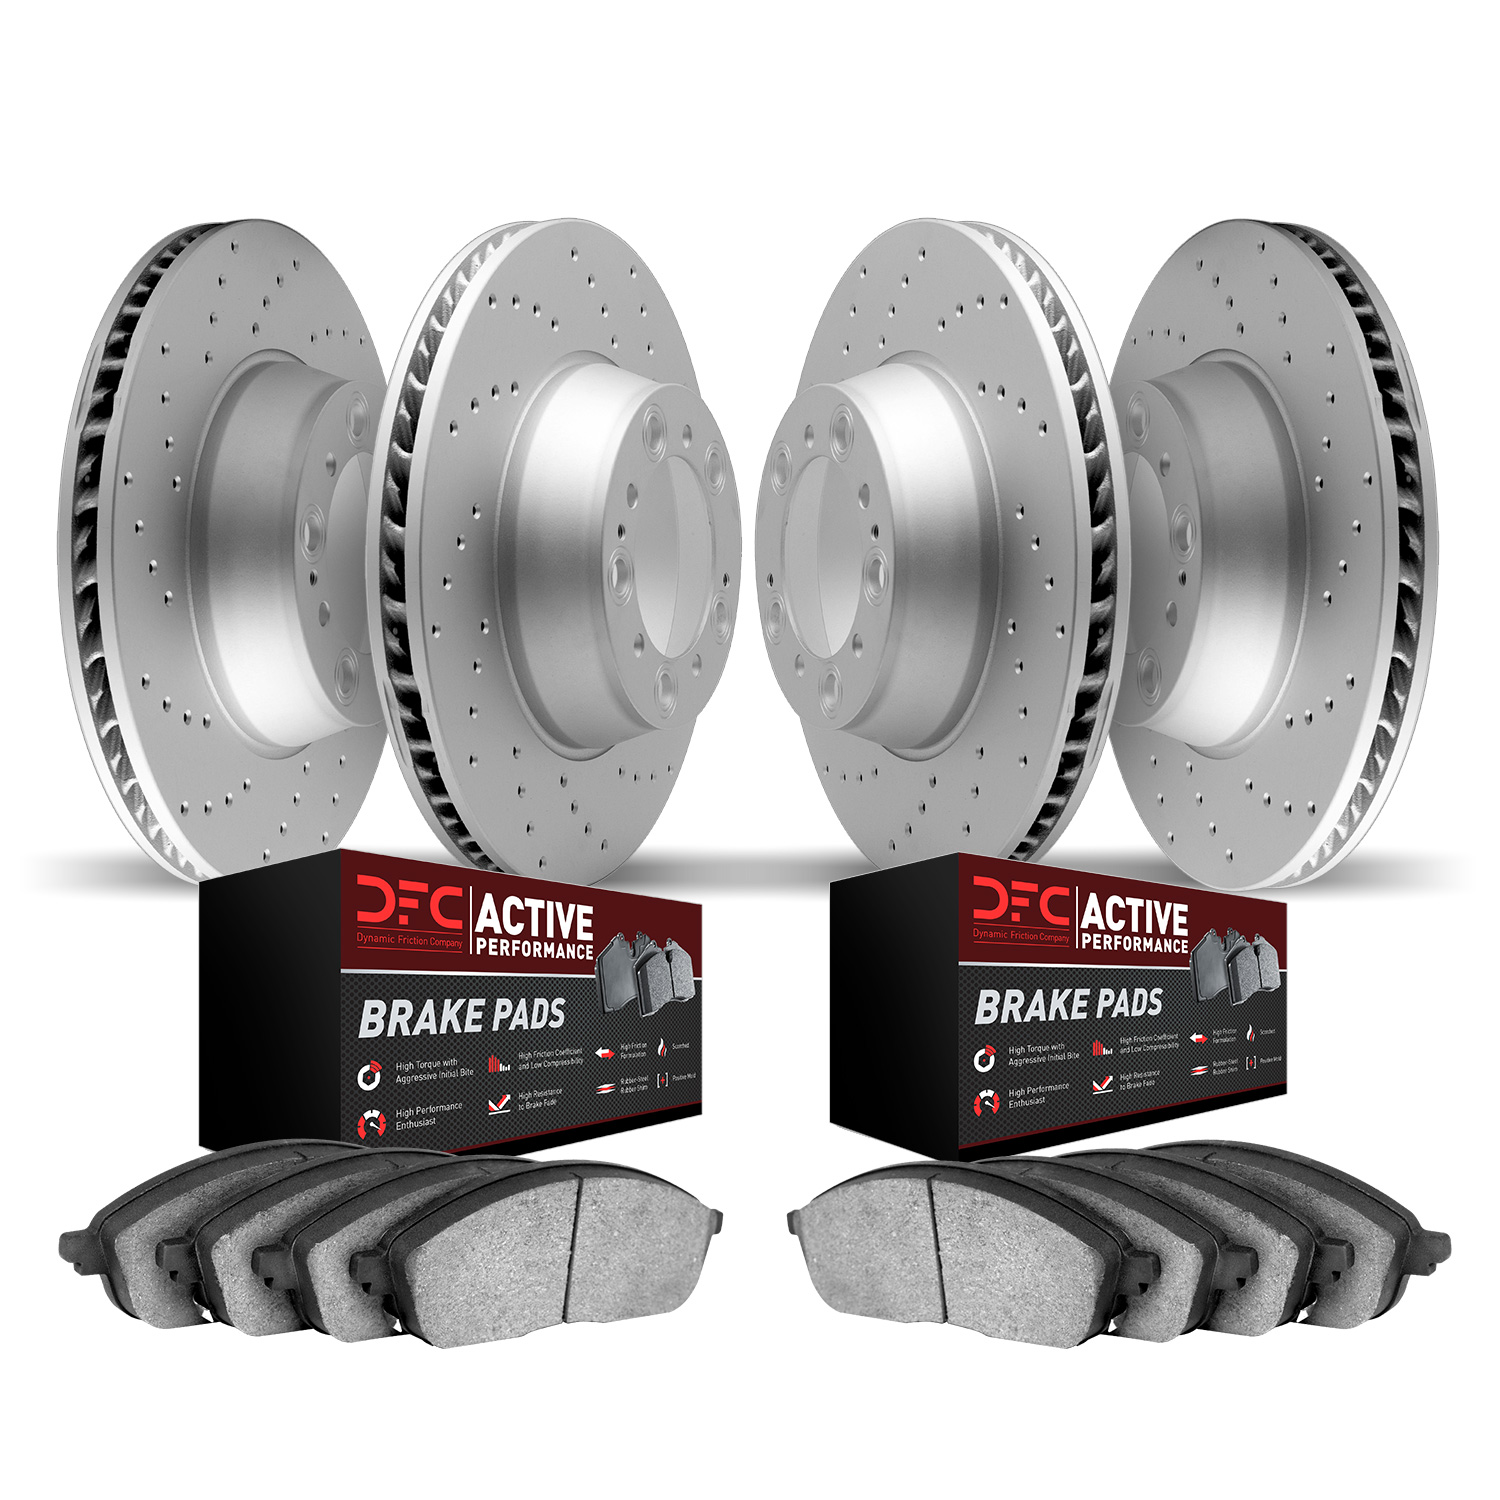 2704-46025 Geoperformance Drilled Brake Rotors with Active Performance Pads Kit, Fits Select GM, Position: Front and Rear